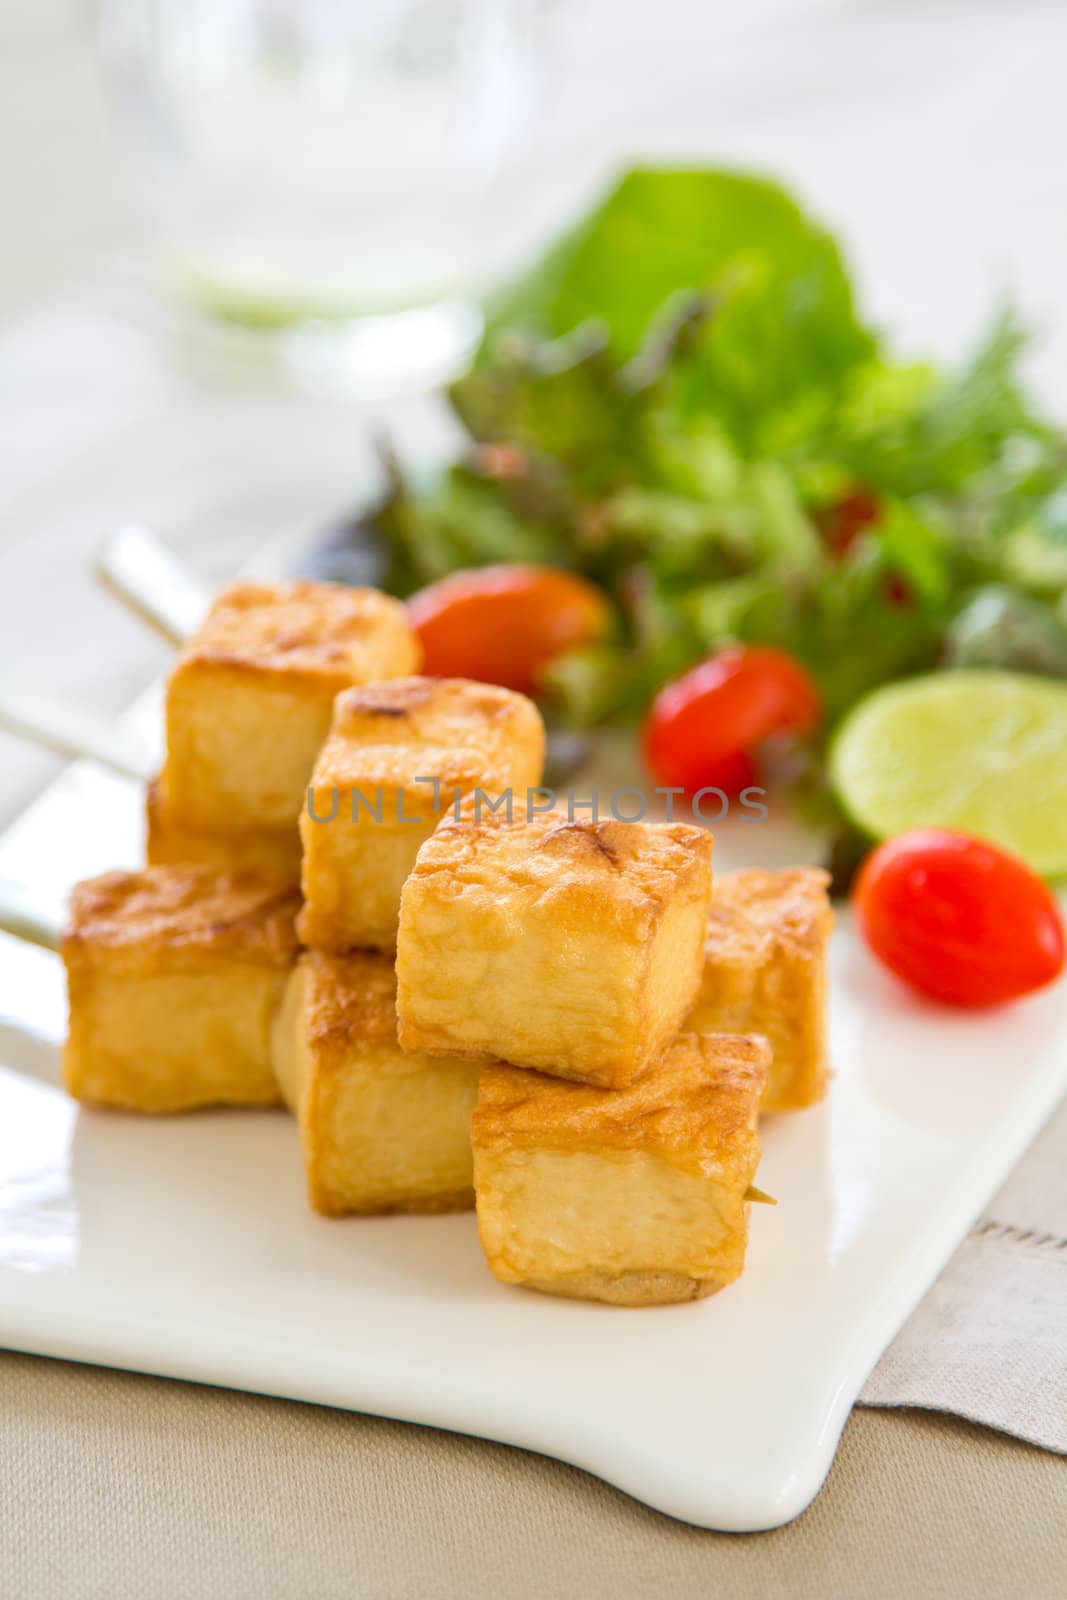 Grilled Tofu and salad by vanillaechoes